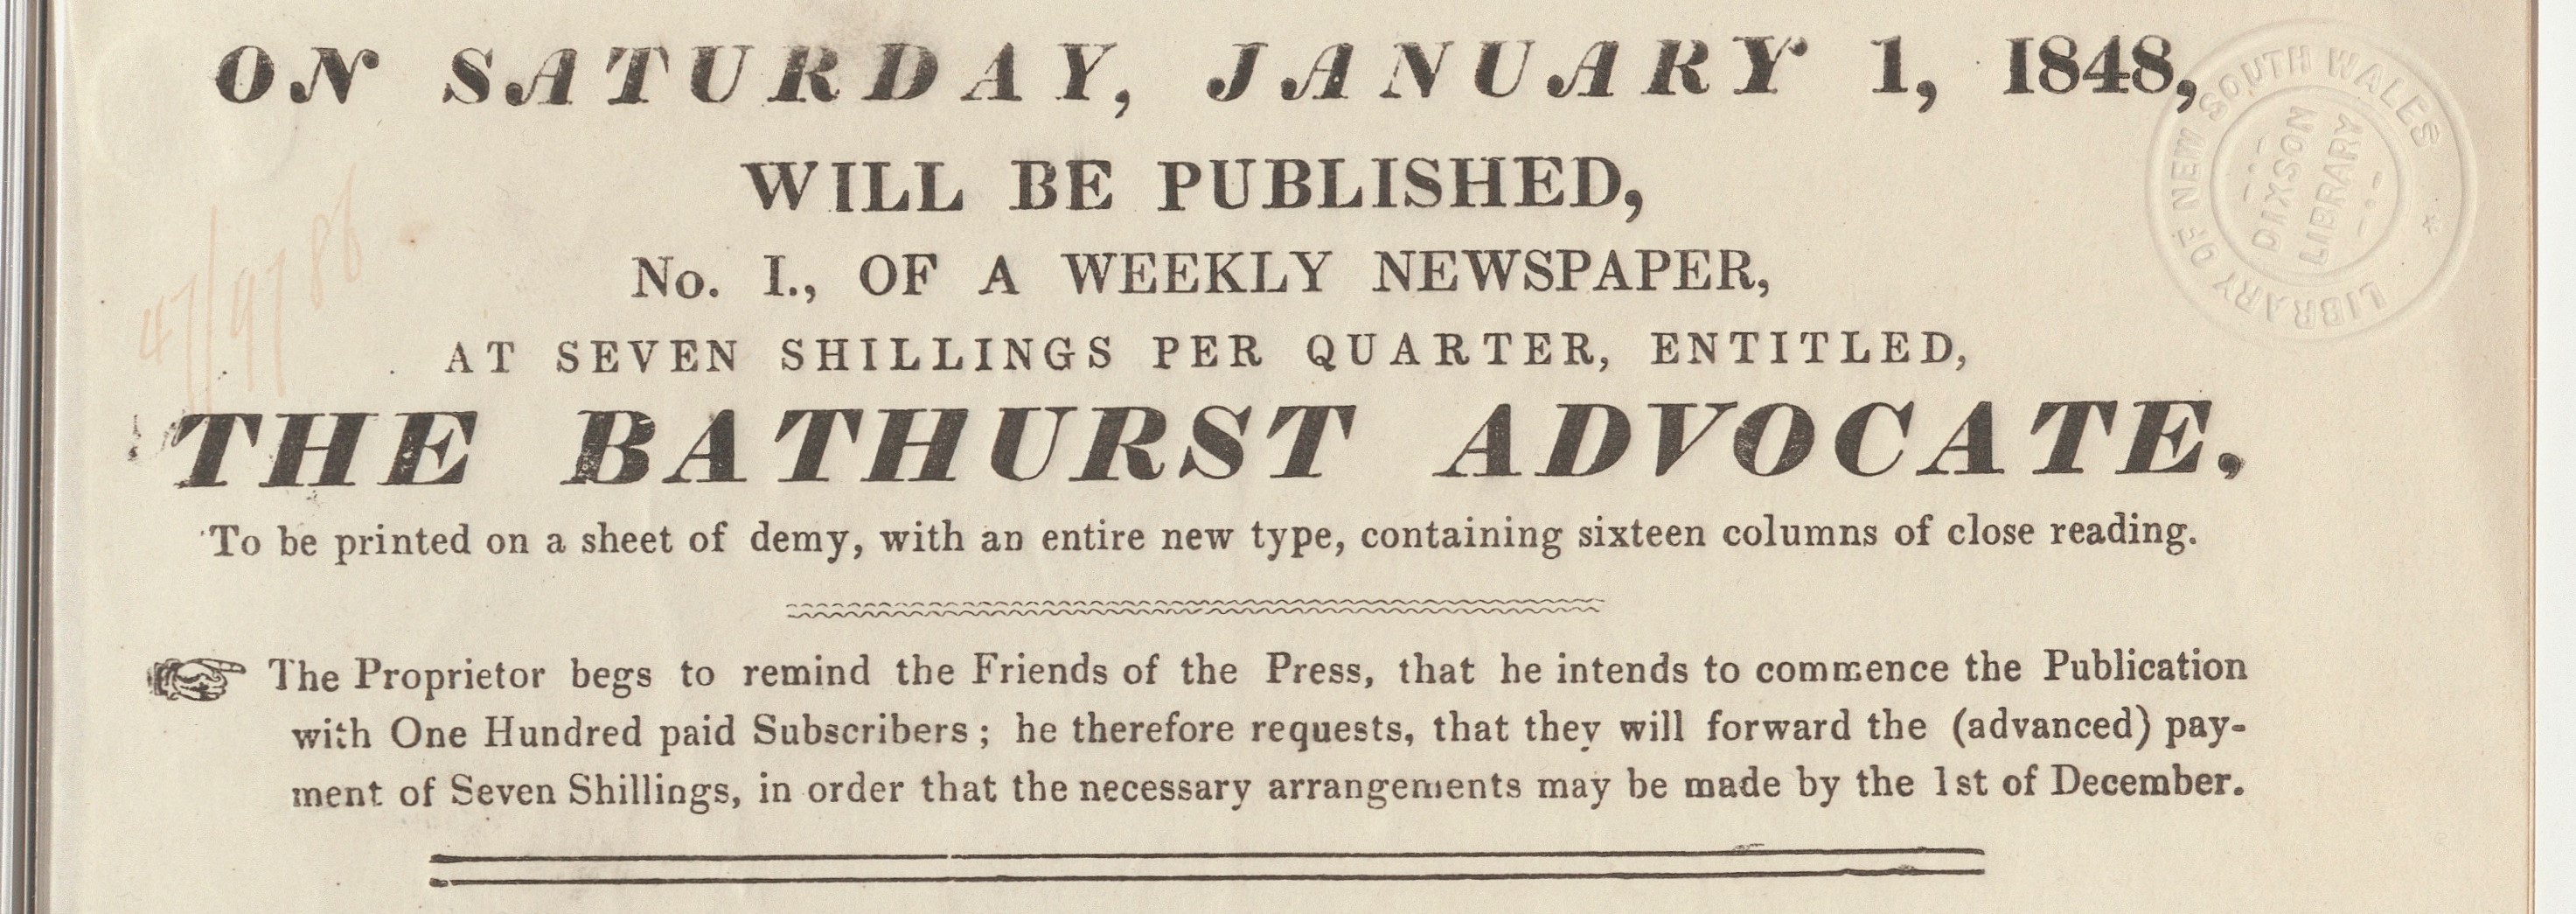 Banner from the Bathurst Advocate, January 1,1848